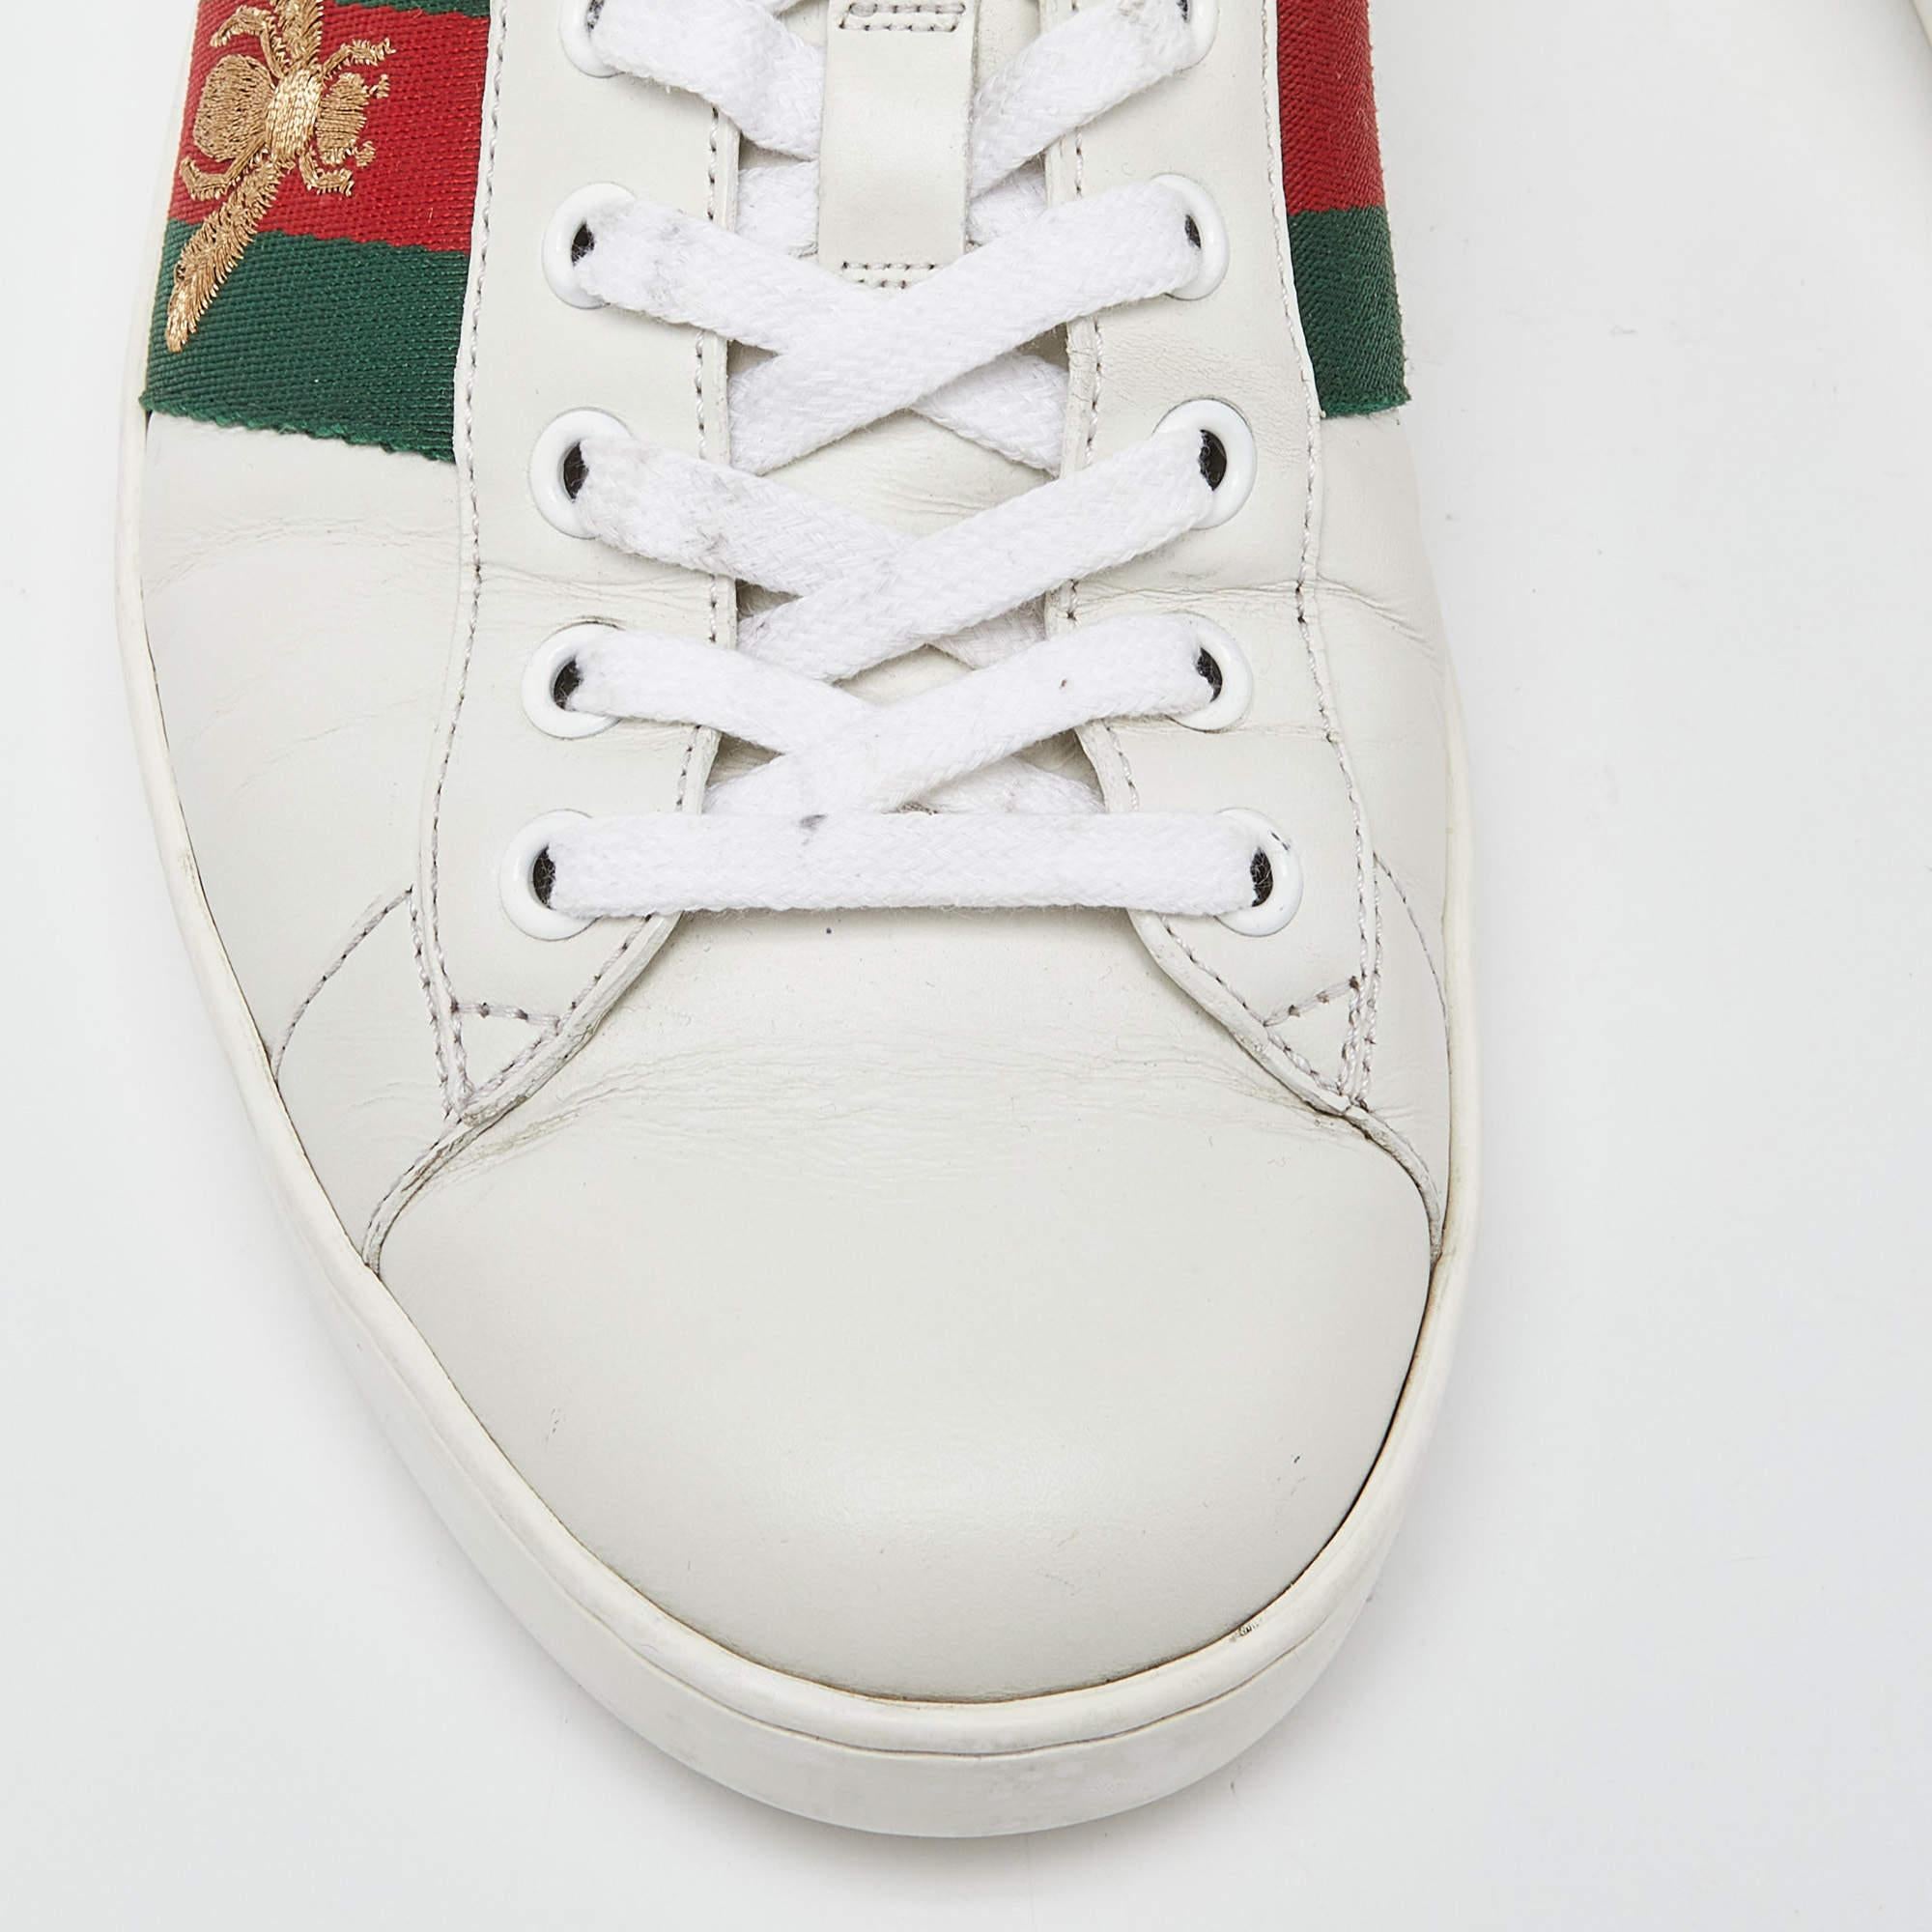 Designed to elevate your style quotient and give you comfort at the same time, these Gucci kicks are crafted using the best materials. Pair them with your casuals for a cool look.

